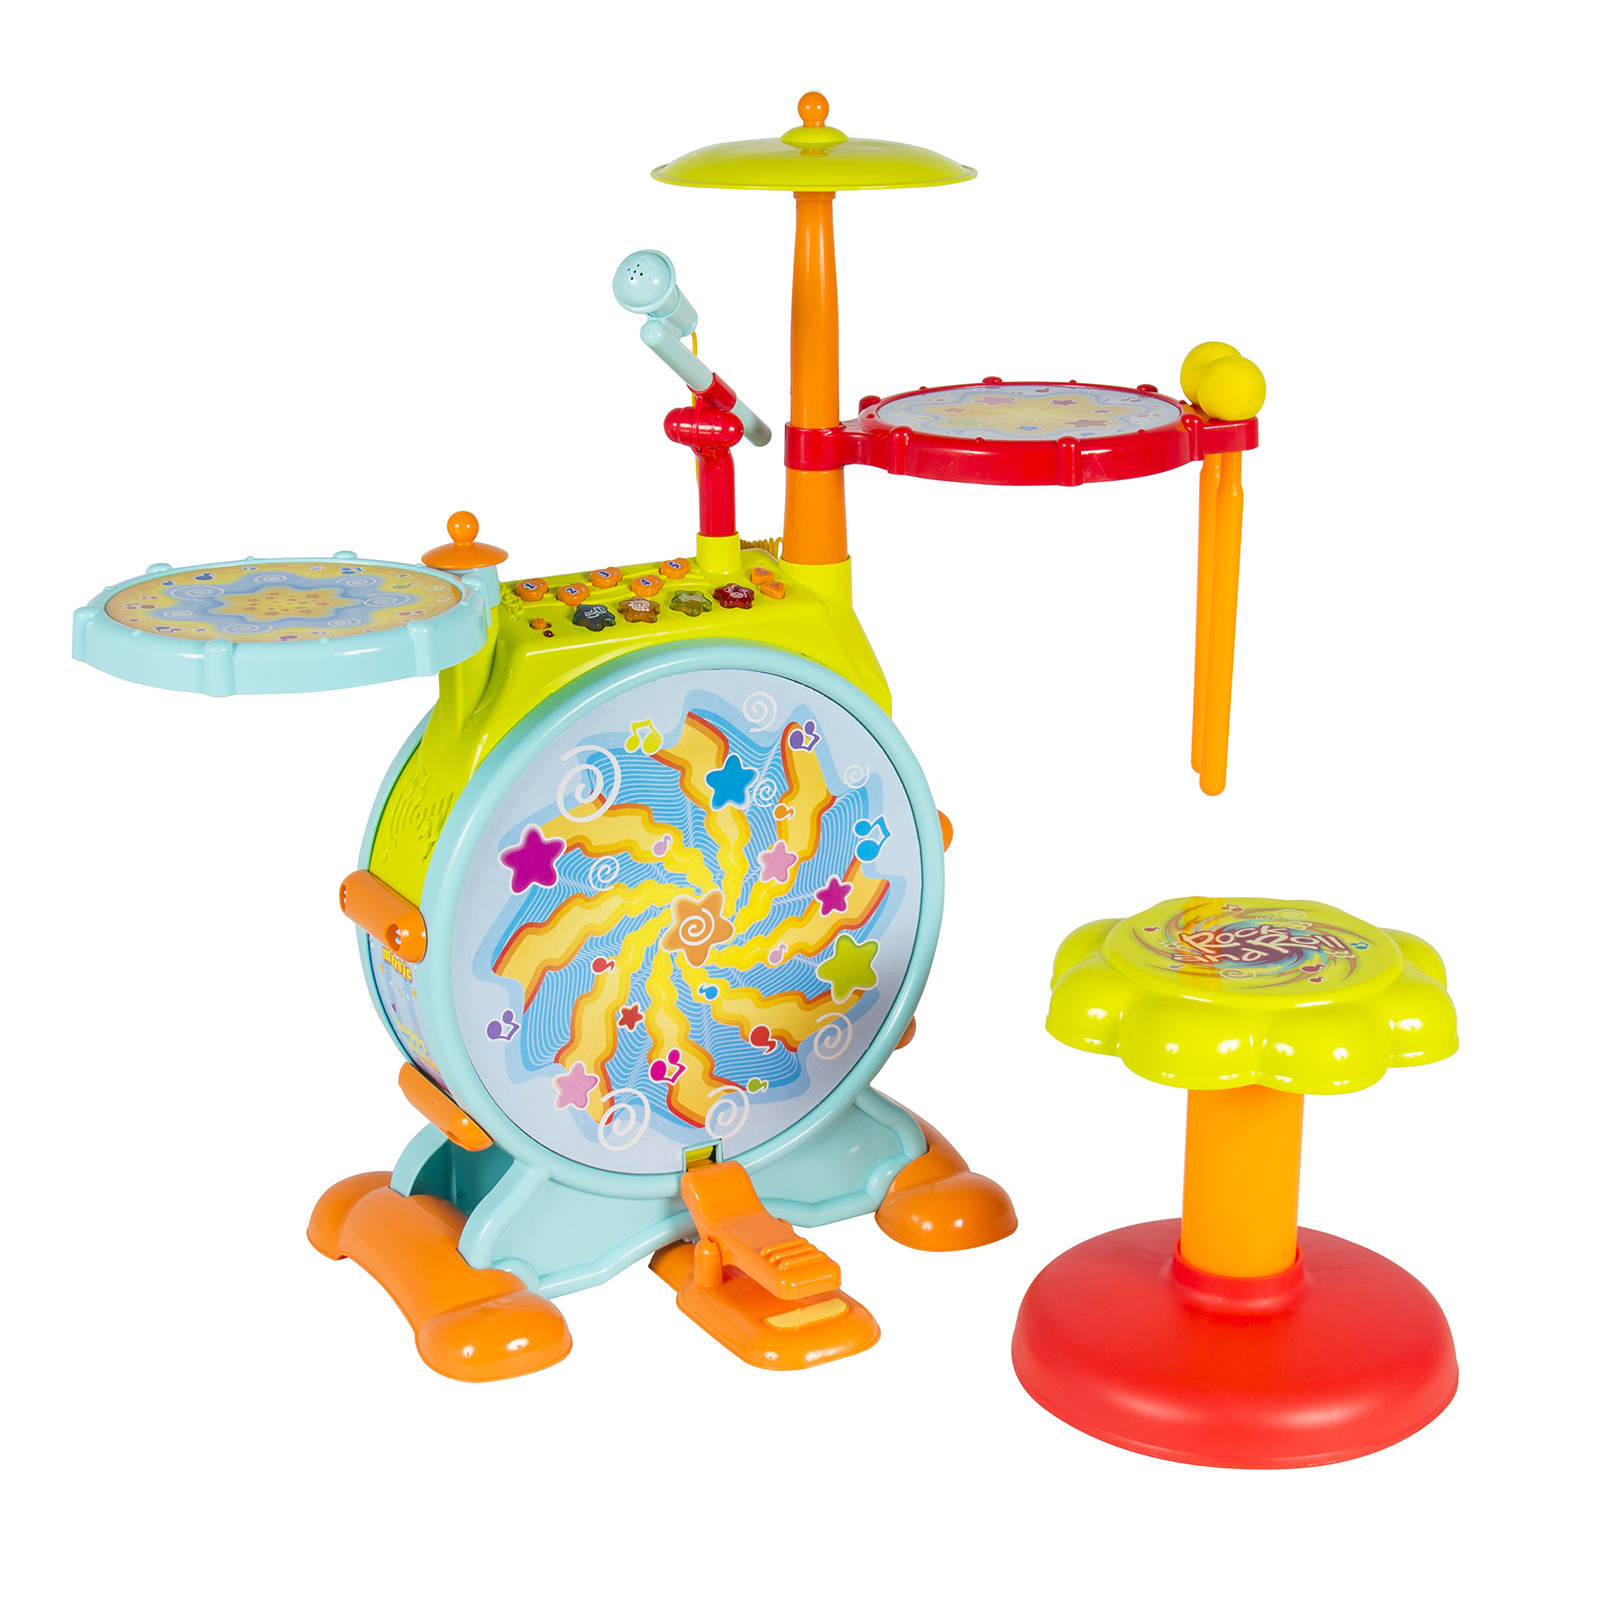 Best Choice Products Kids Electronic Toy Drum Set w/ Adjustable Sing-Along, Microphone, Stool, Drumsticks - image 3 of 8